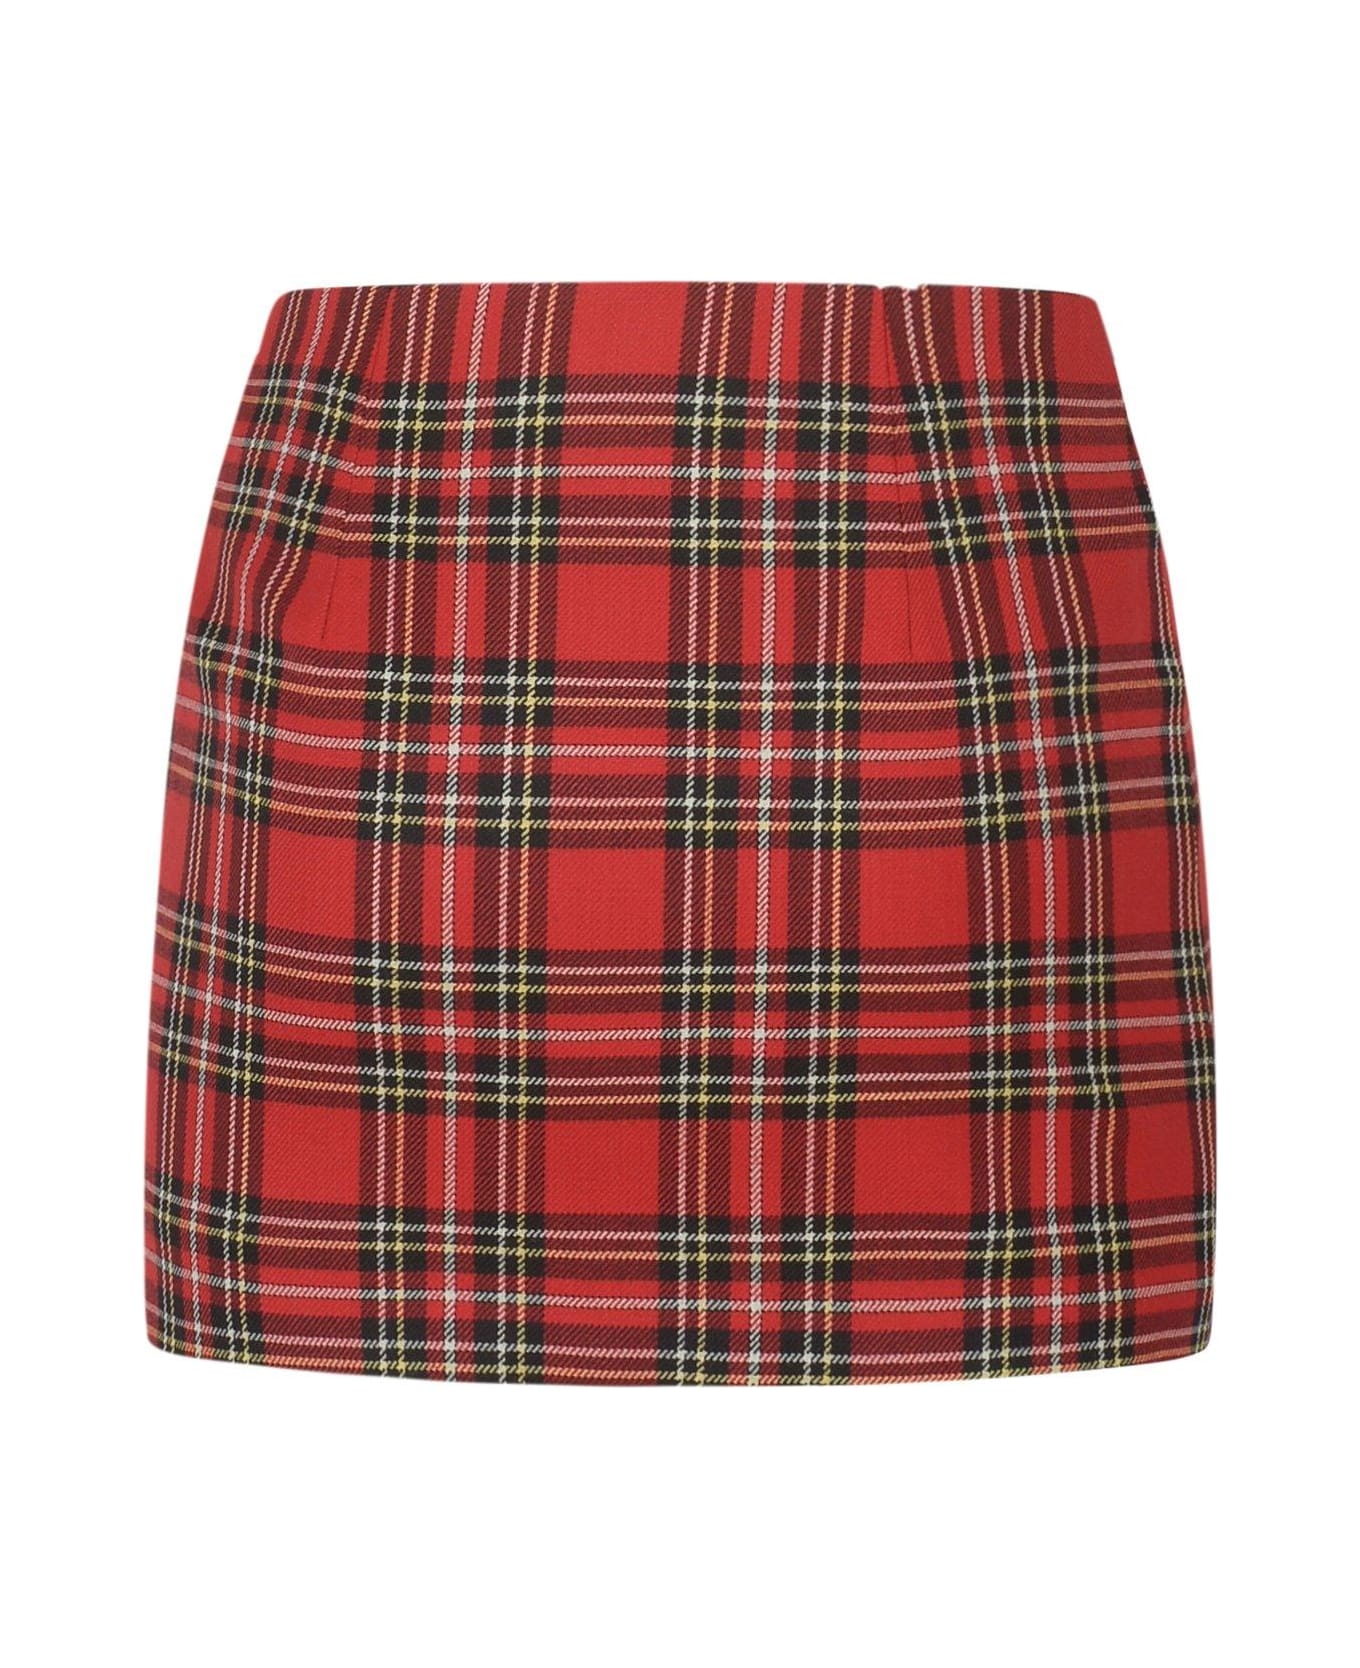 Alessandra Rich Plaid-check Patterned Side-zipped Mini Skirt - RED/BLACK